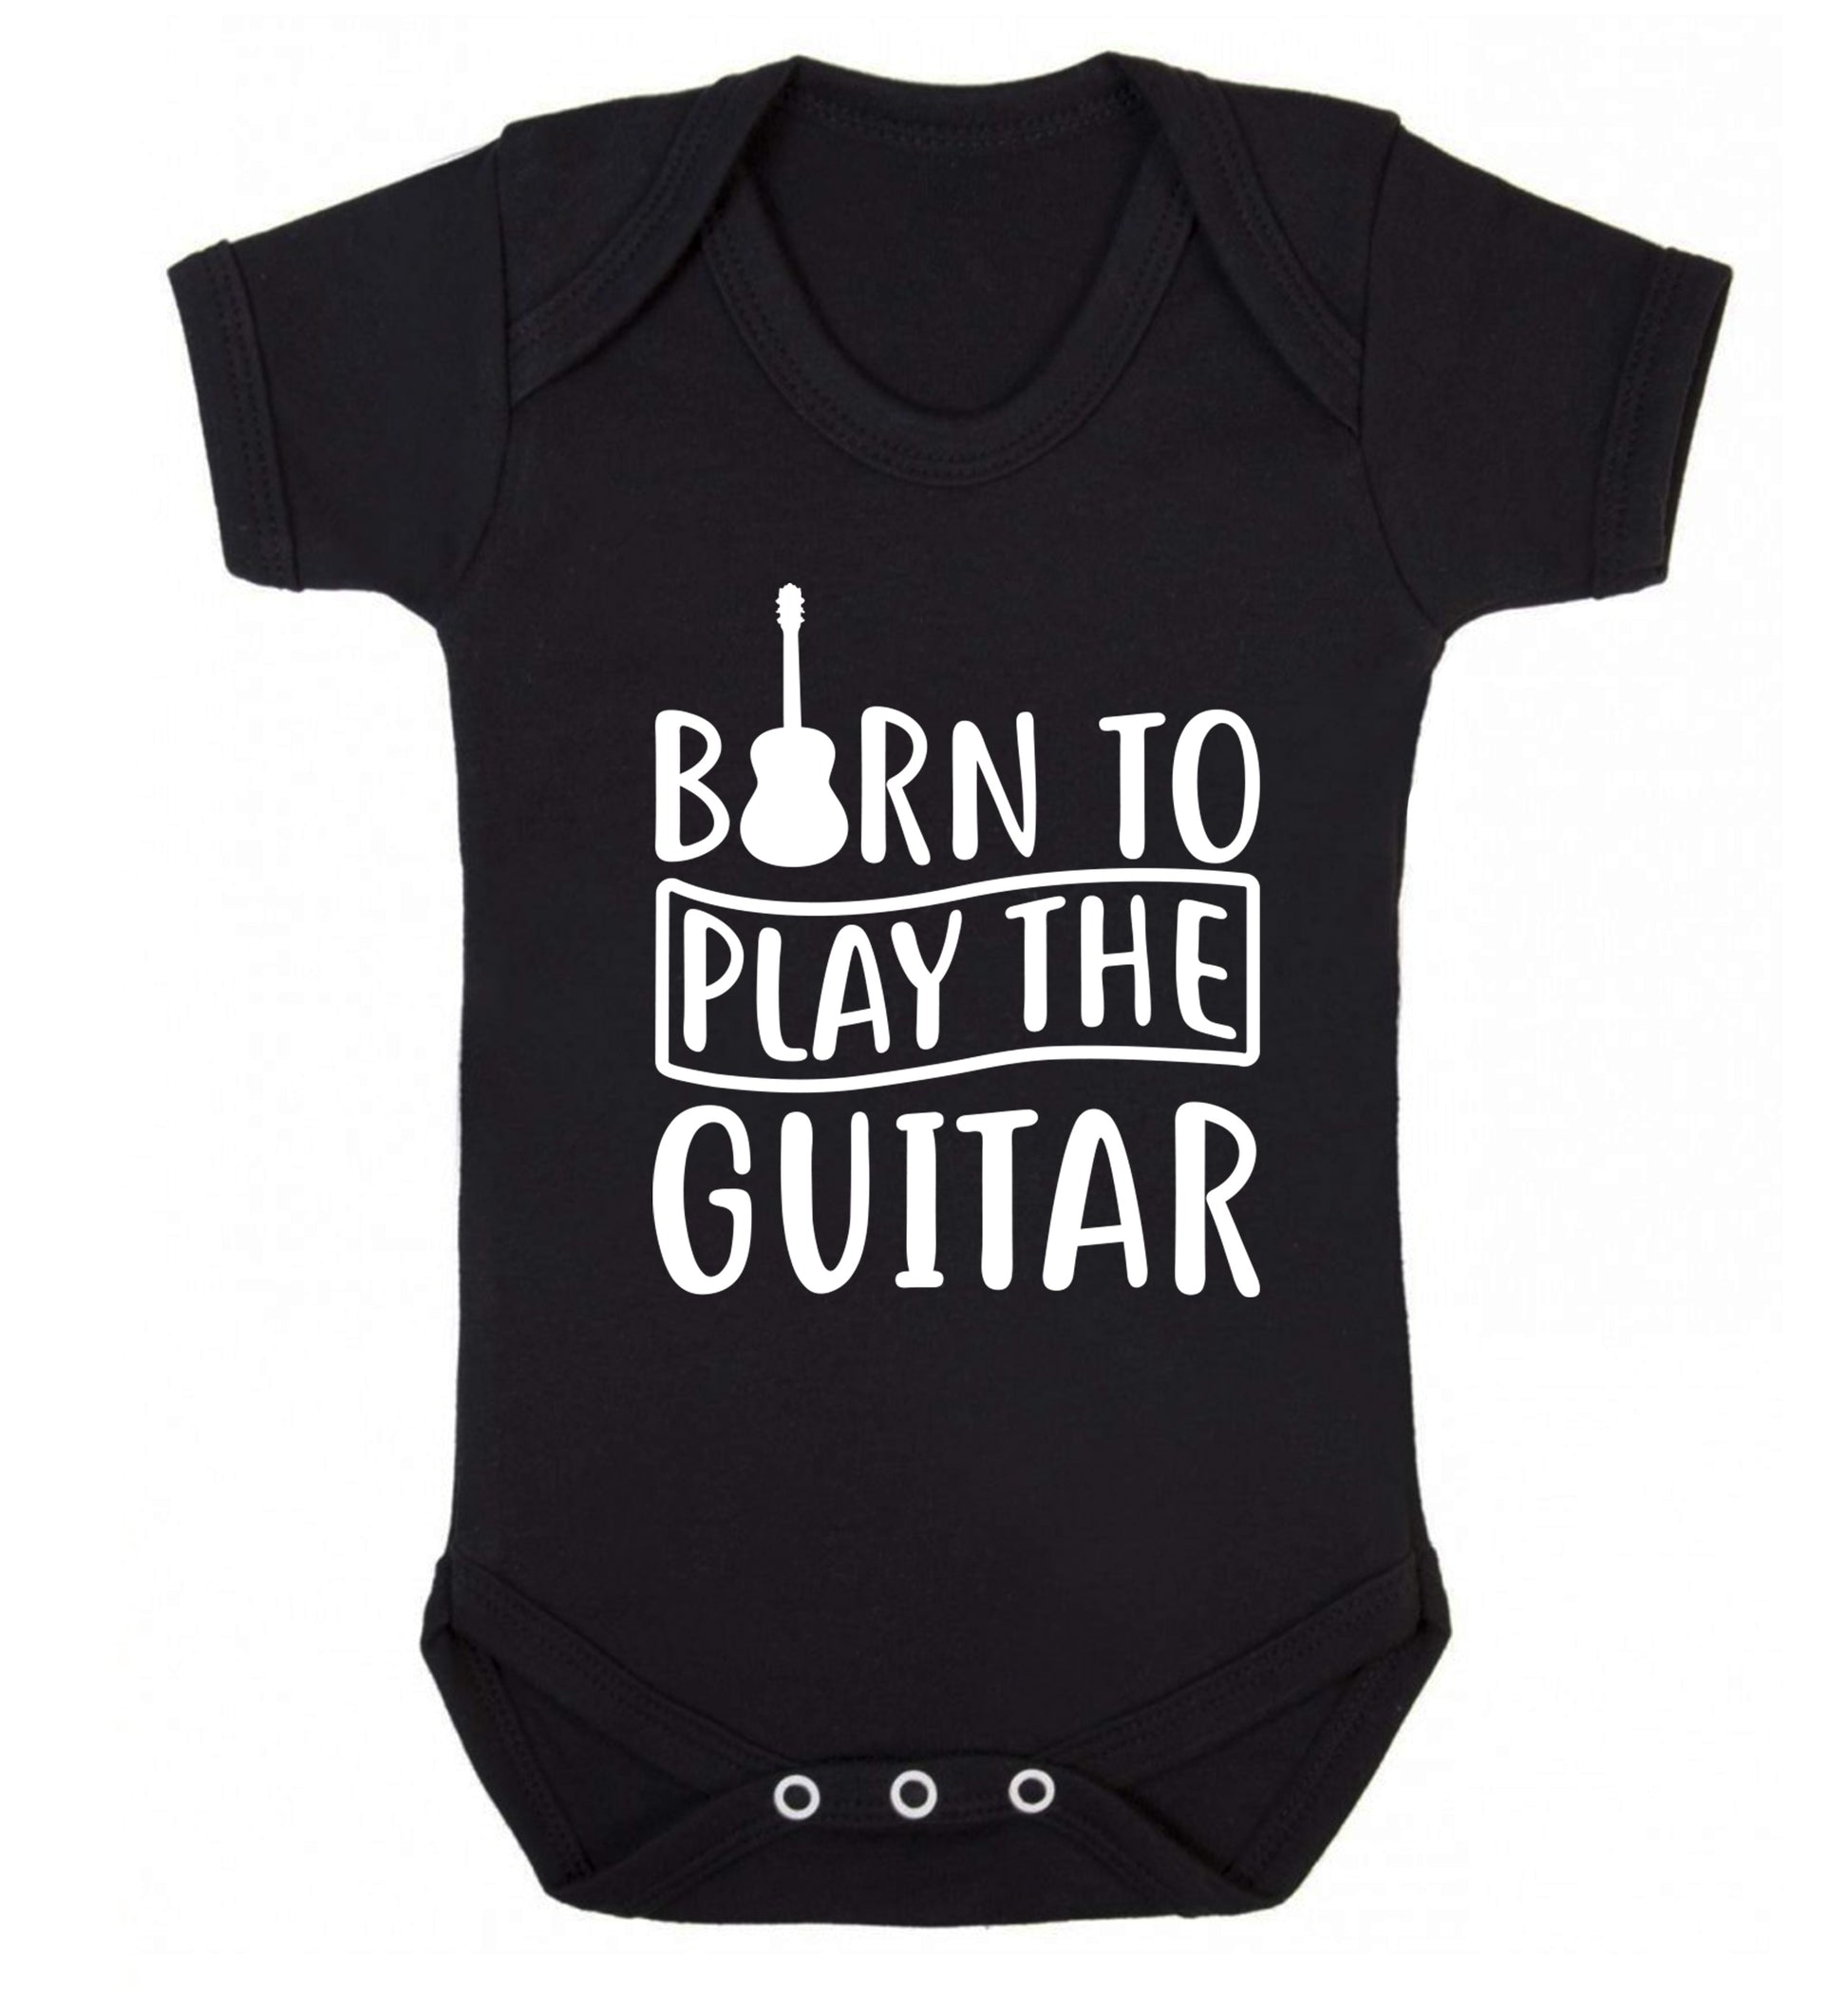 Born to play the guitar Baby Vest black 18-24 months